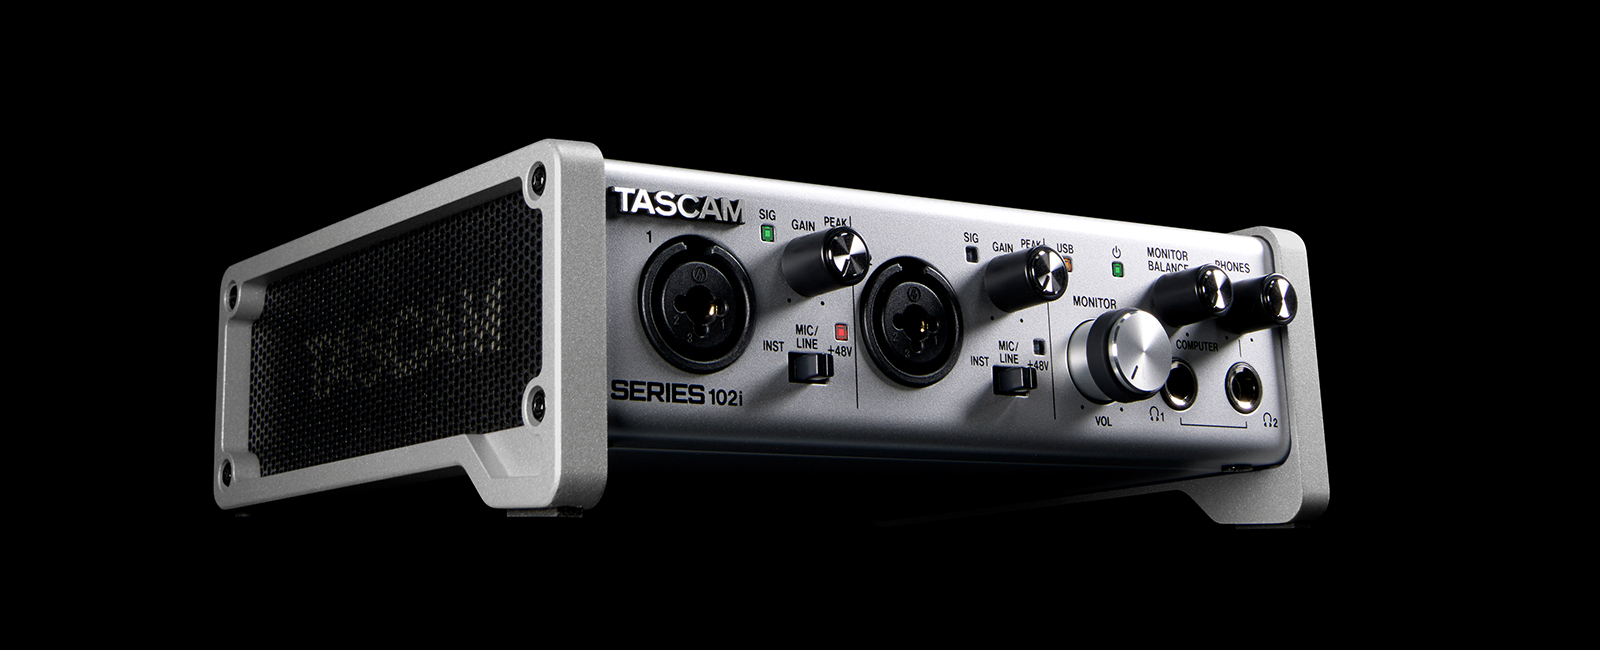 SERIES 102i | OVERVIEW | TASCAM - United States